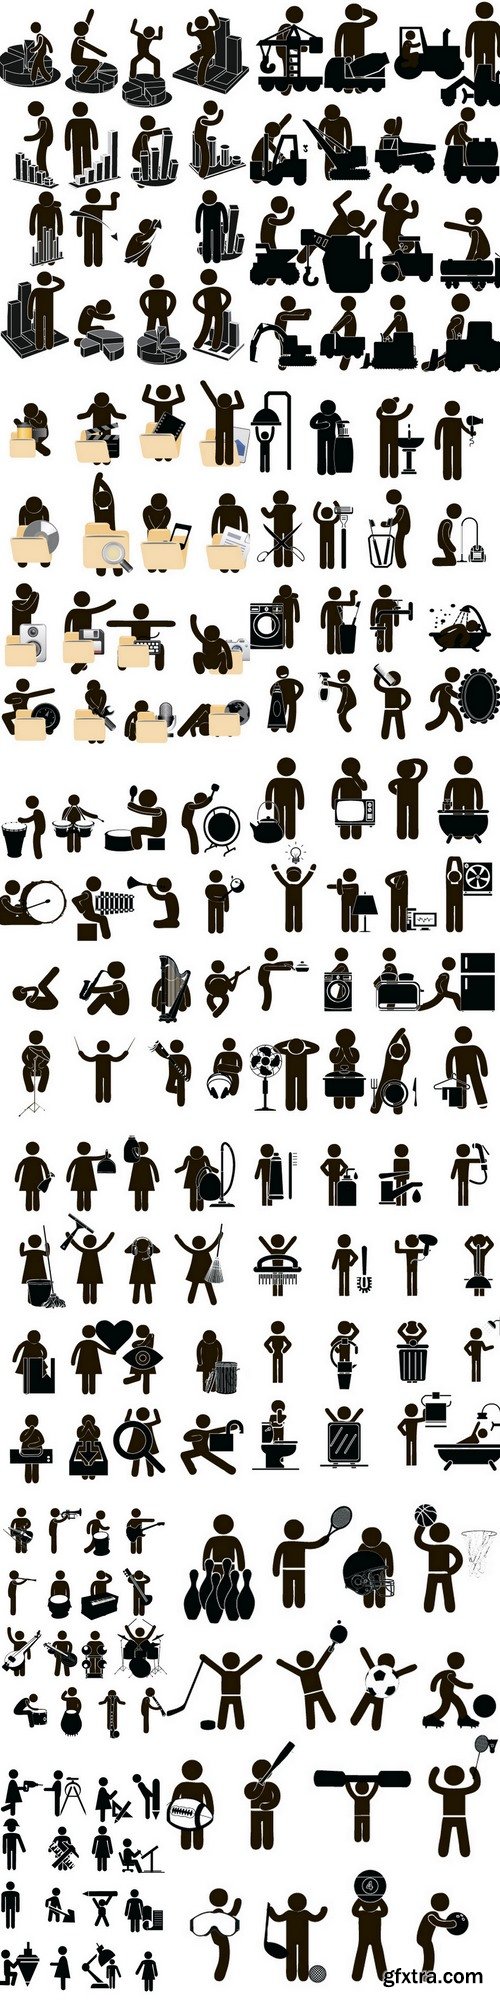 People in everyday life icons